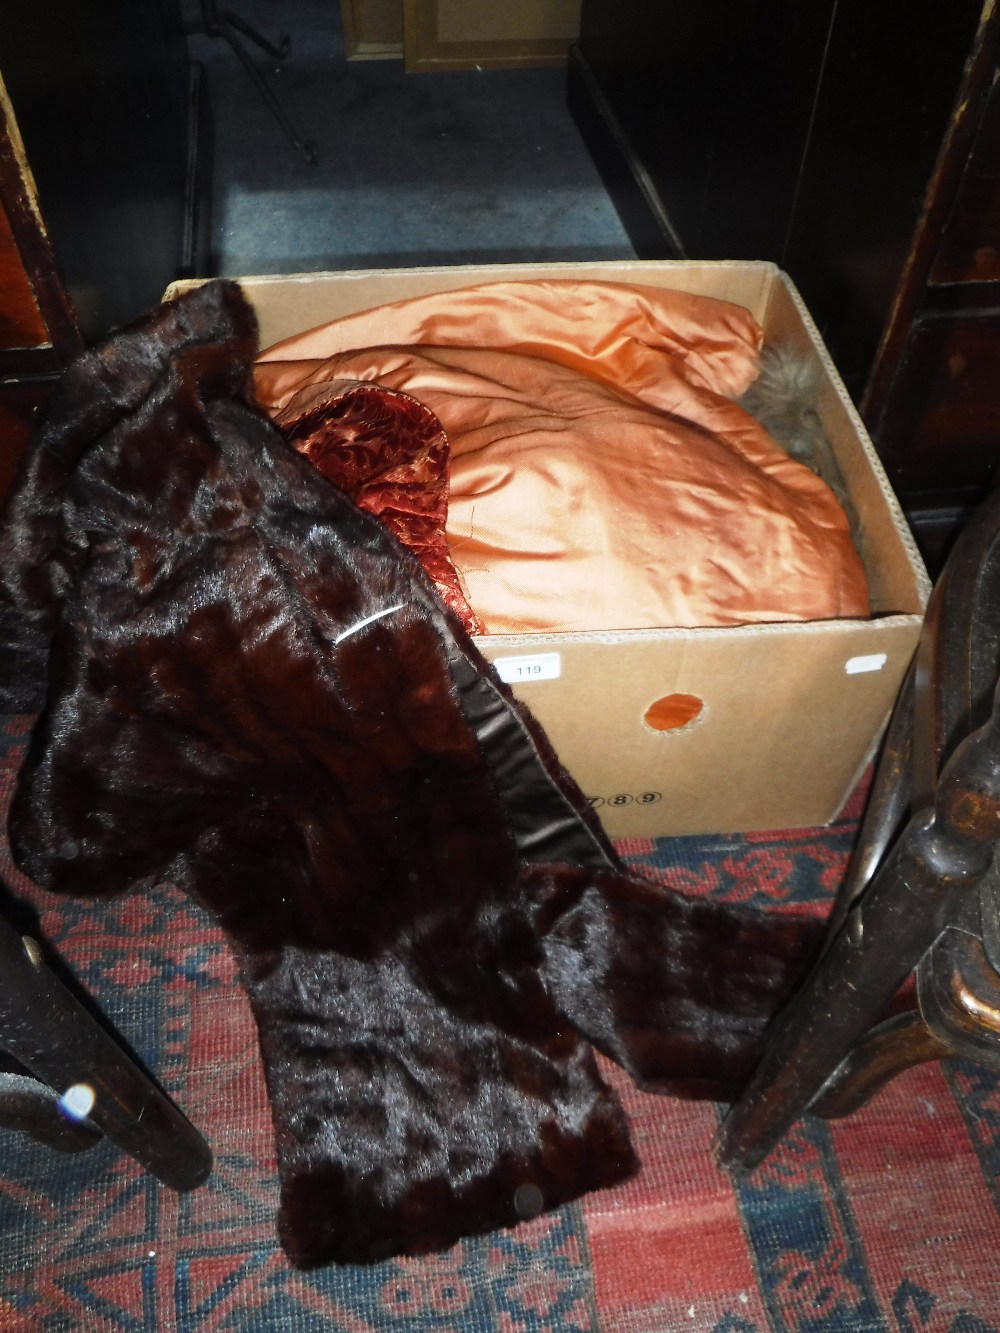 A FUR TRIMMED BROCADE COAT and various other items of fur